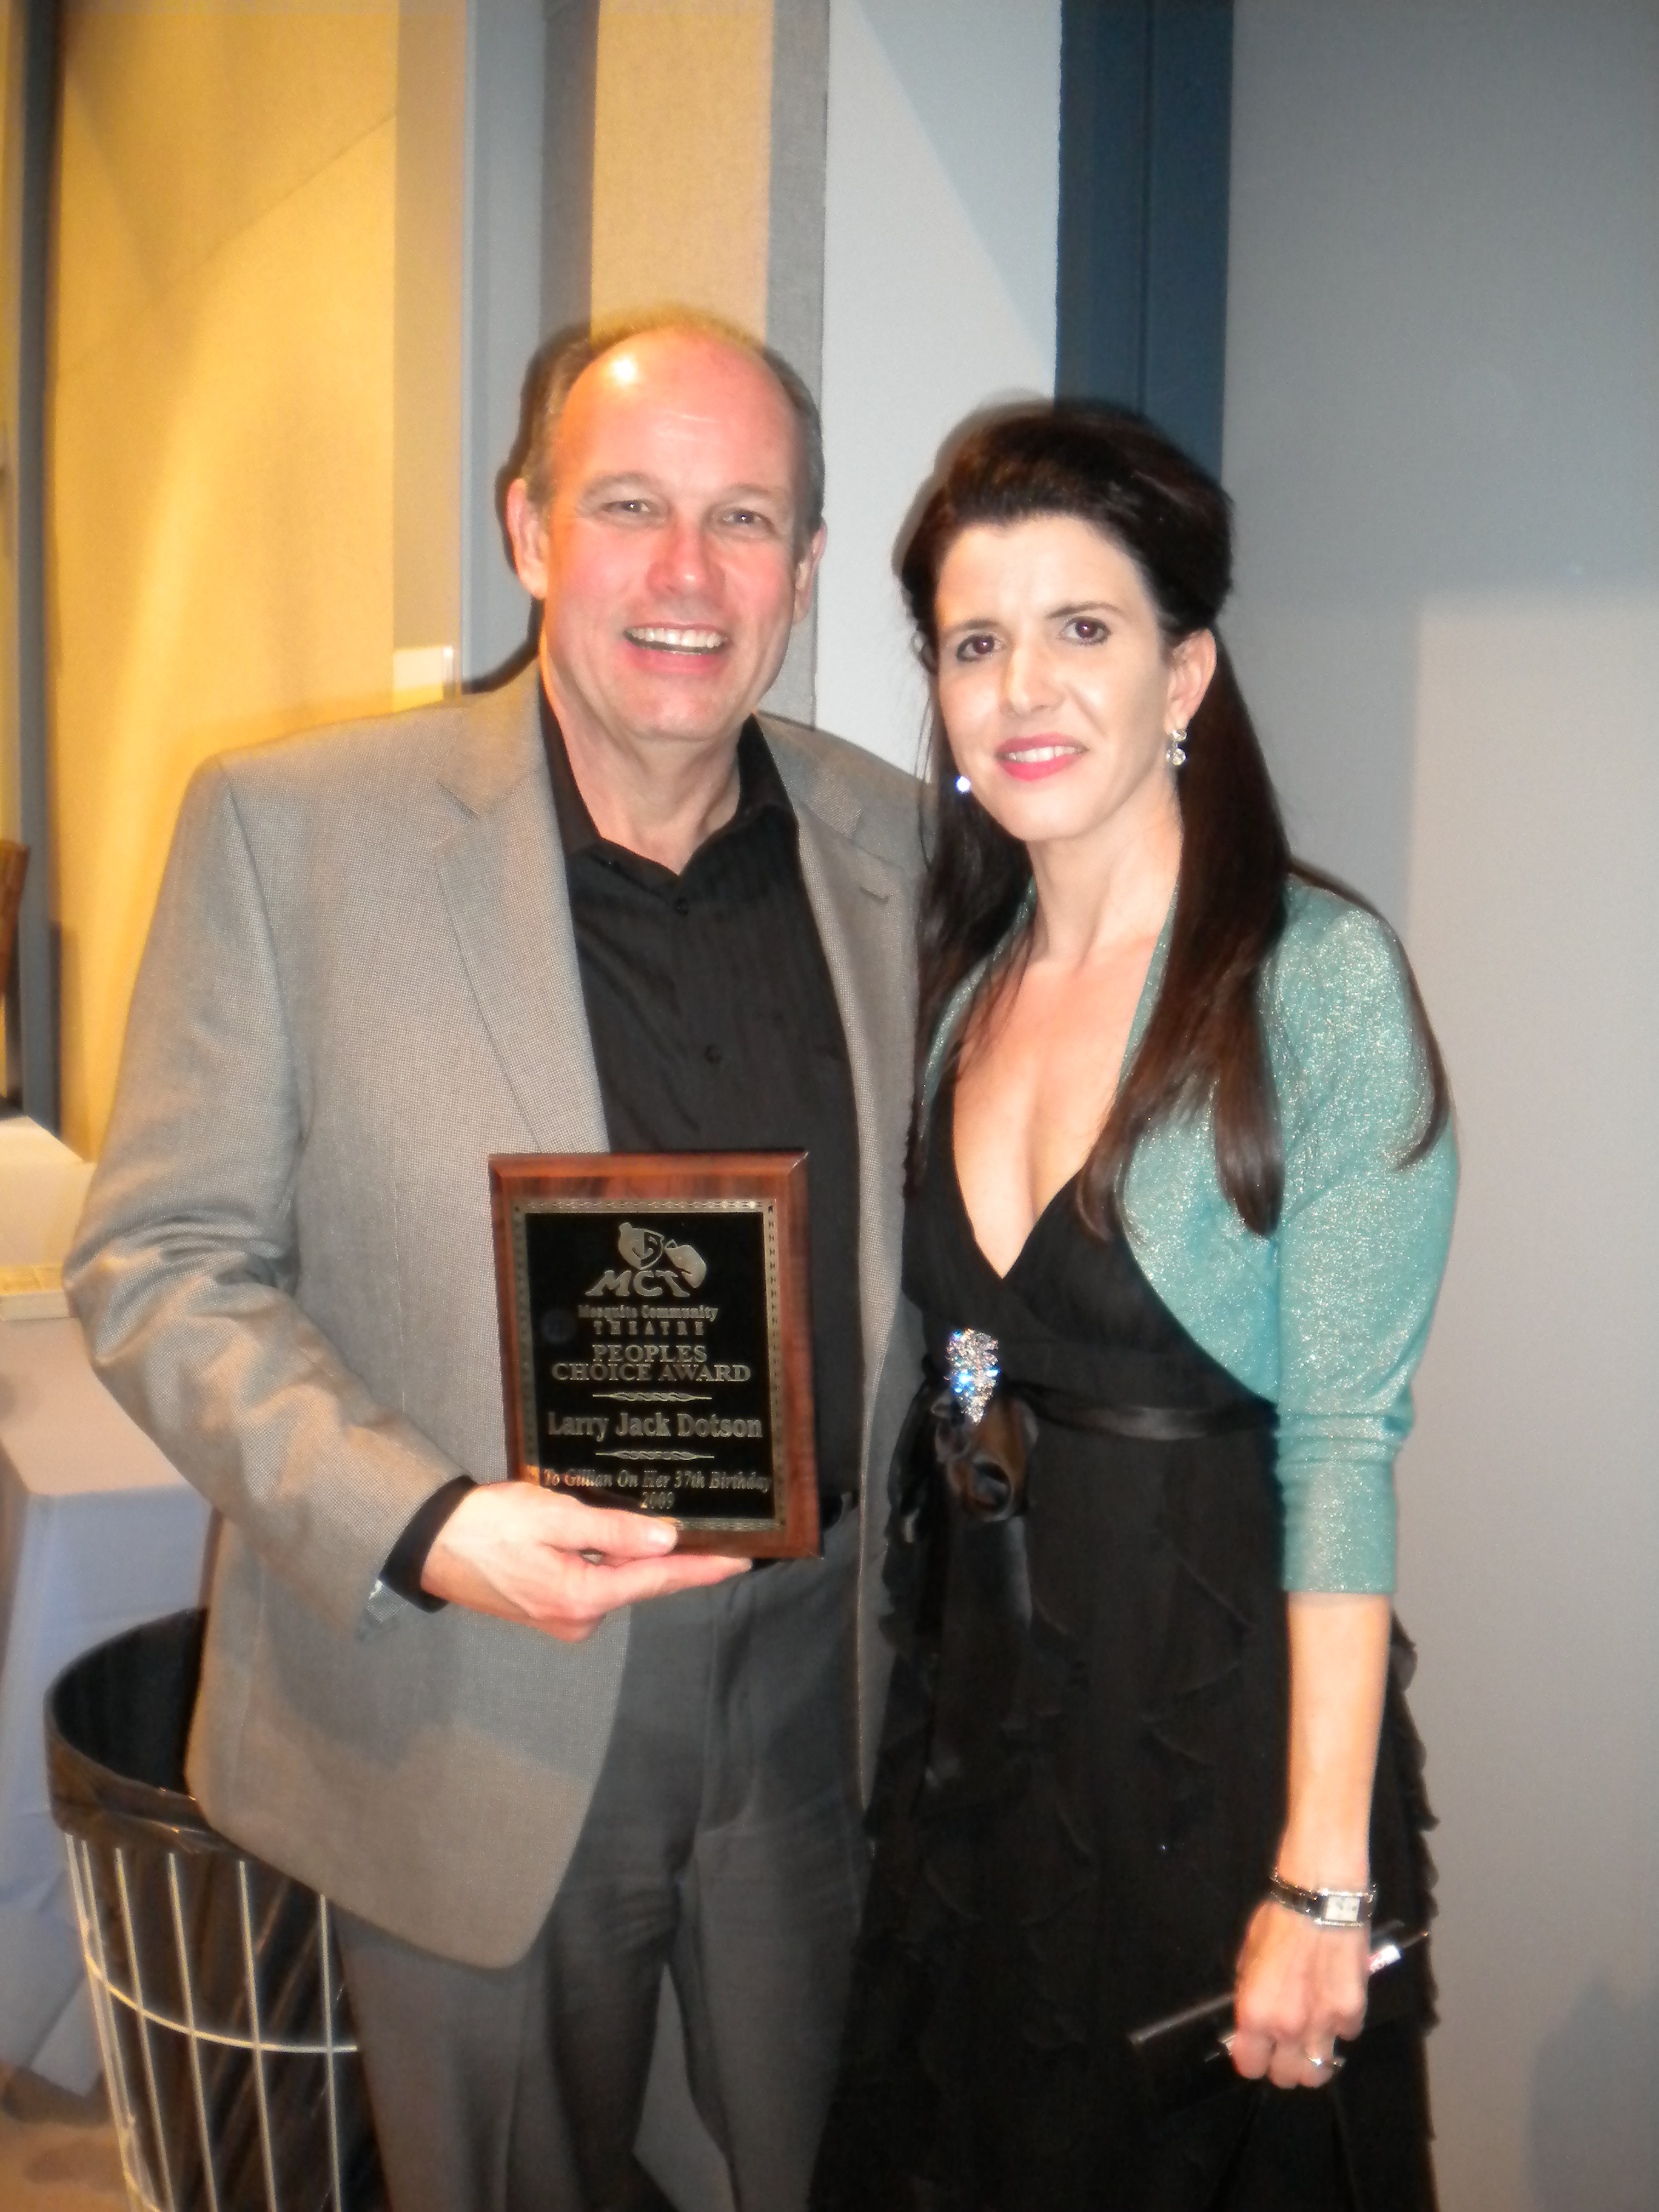 Larry Jack Dotson with wife, Tracy receiving the Peoples Choice Award for best actor in To Gillian On Her 37th Birthday